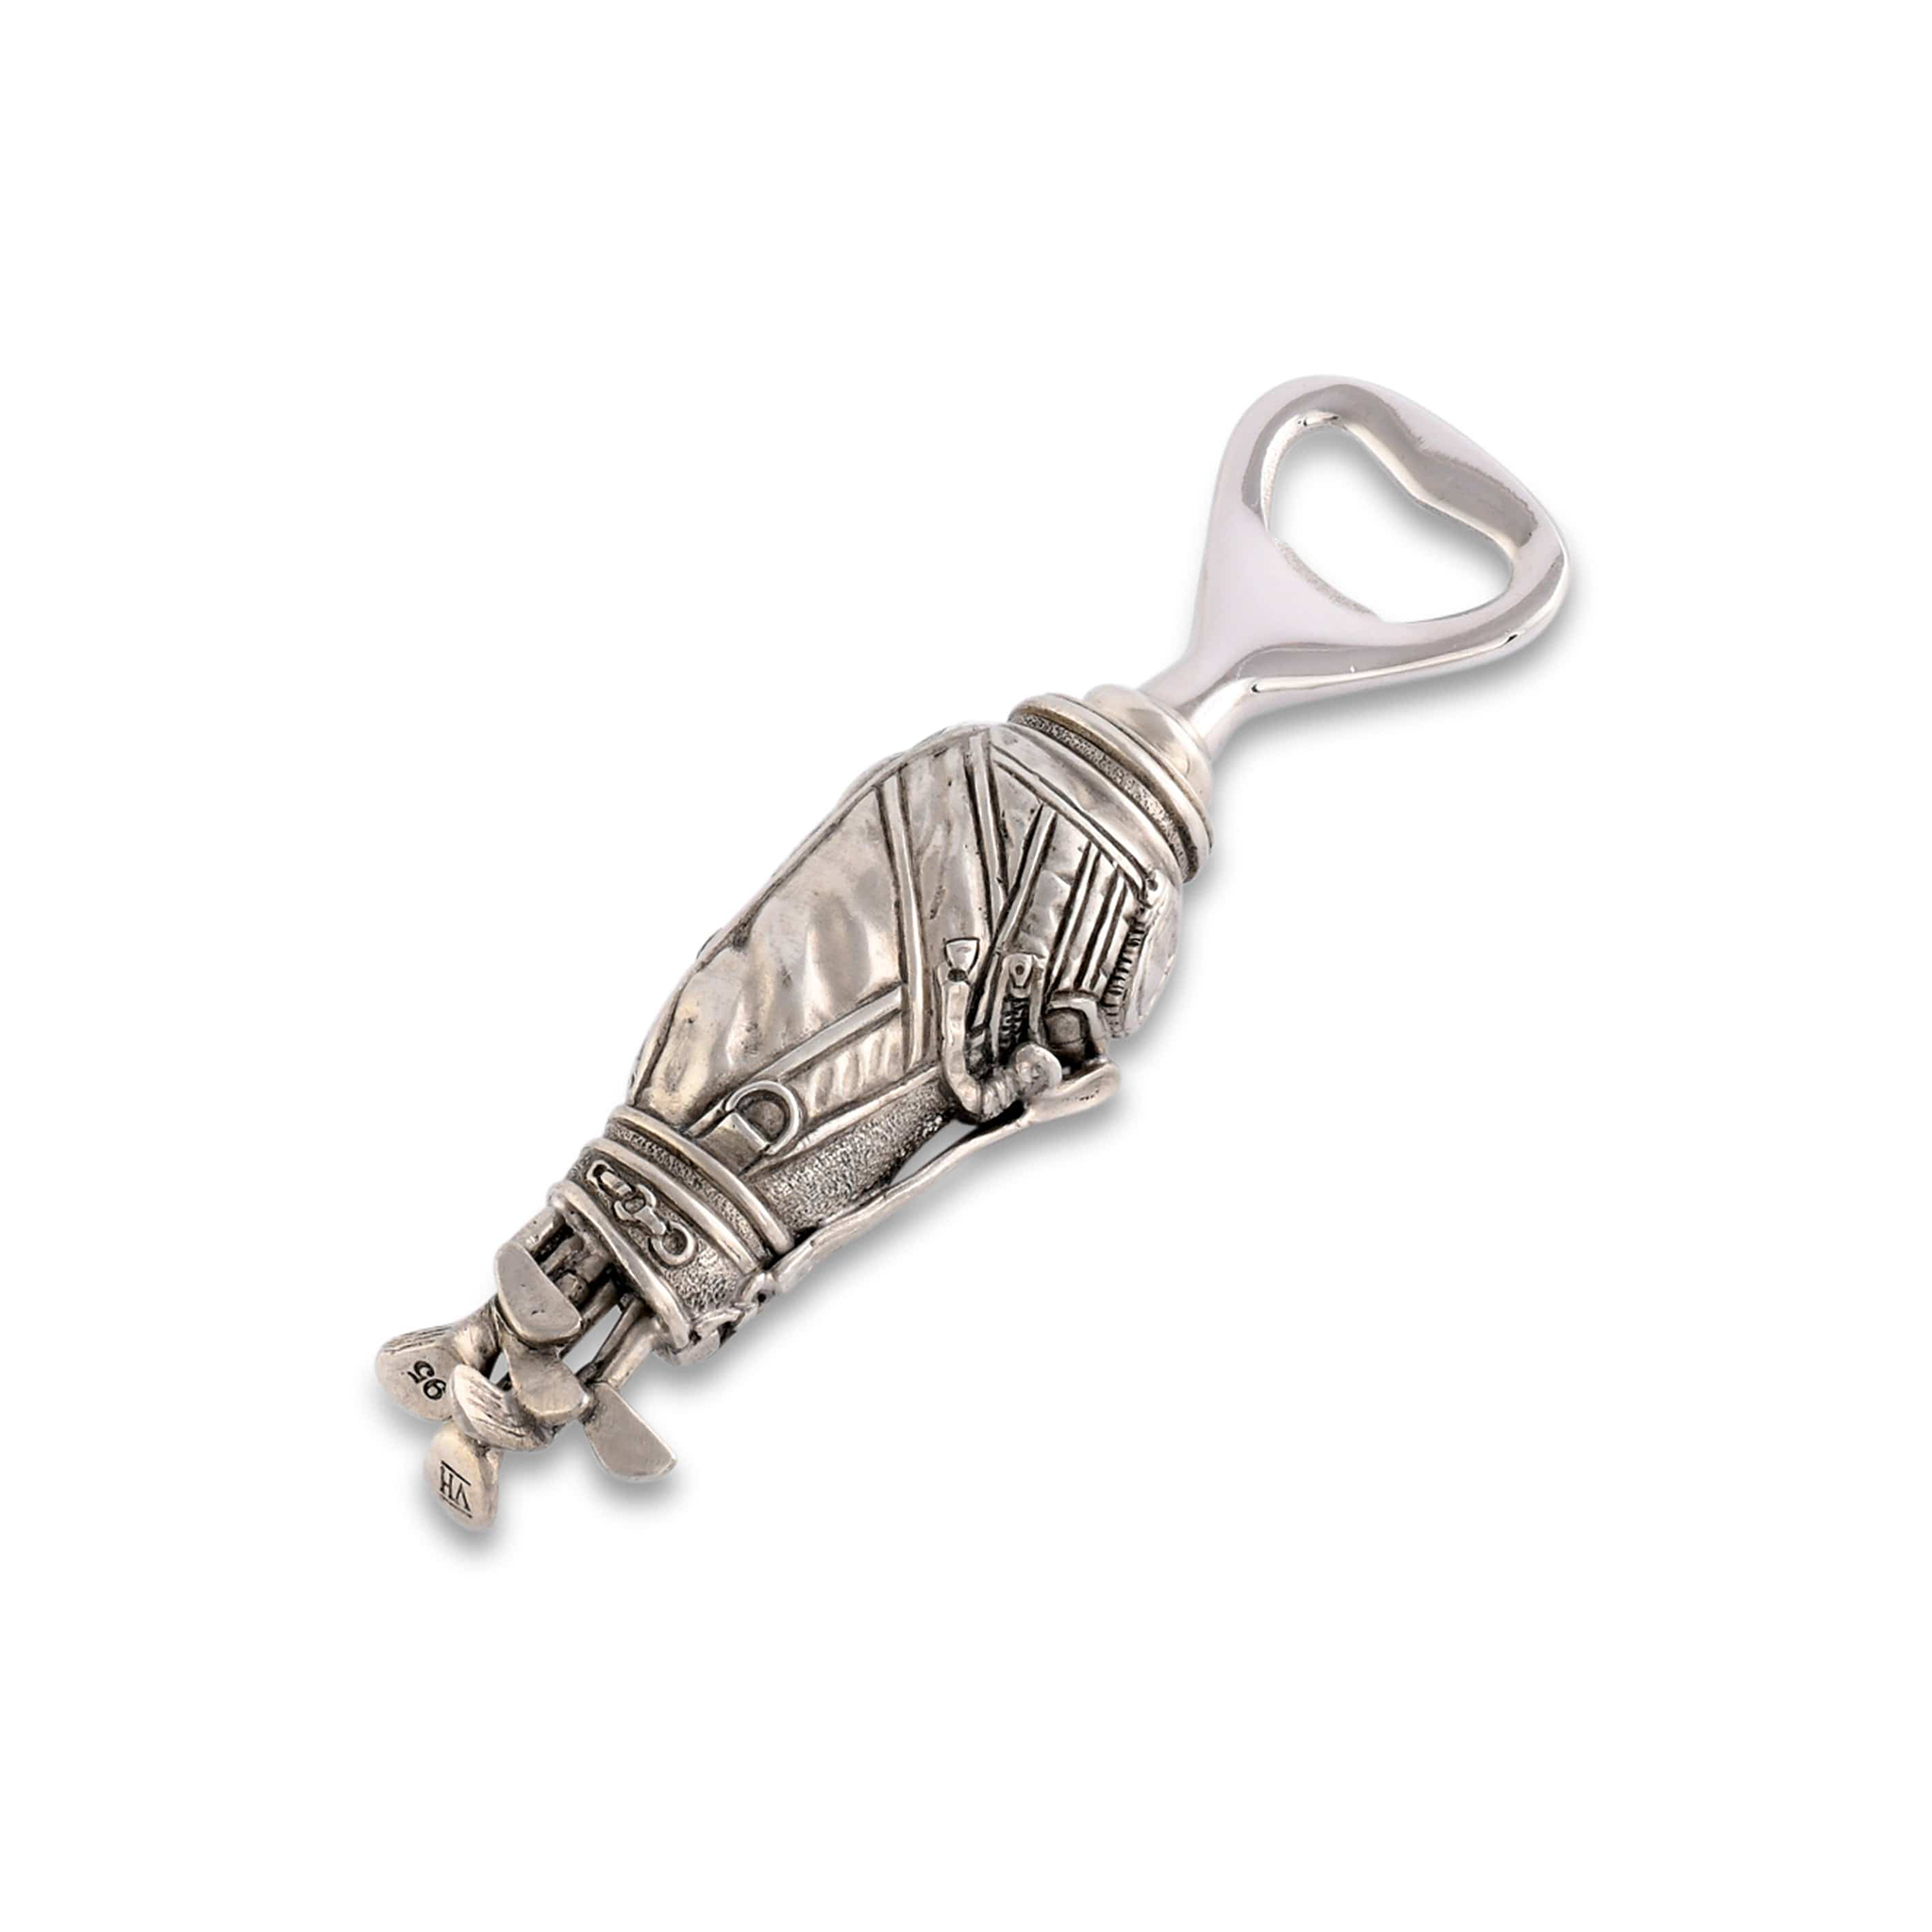 a pewter golf bag bottle opener with a metal handle